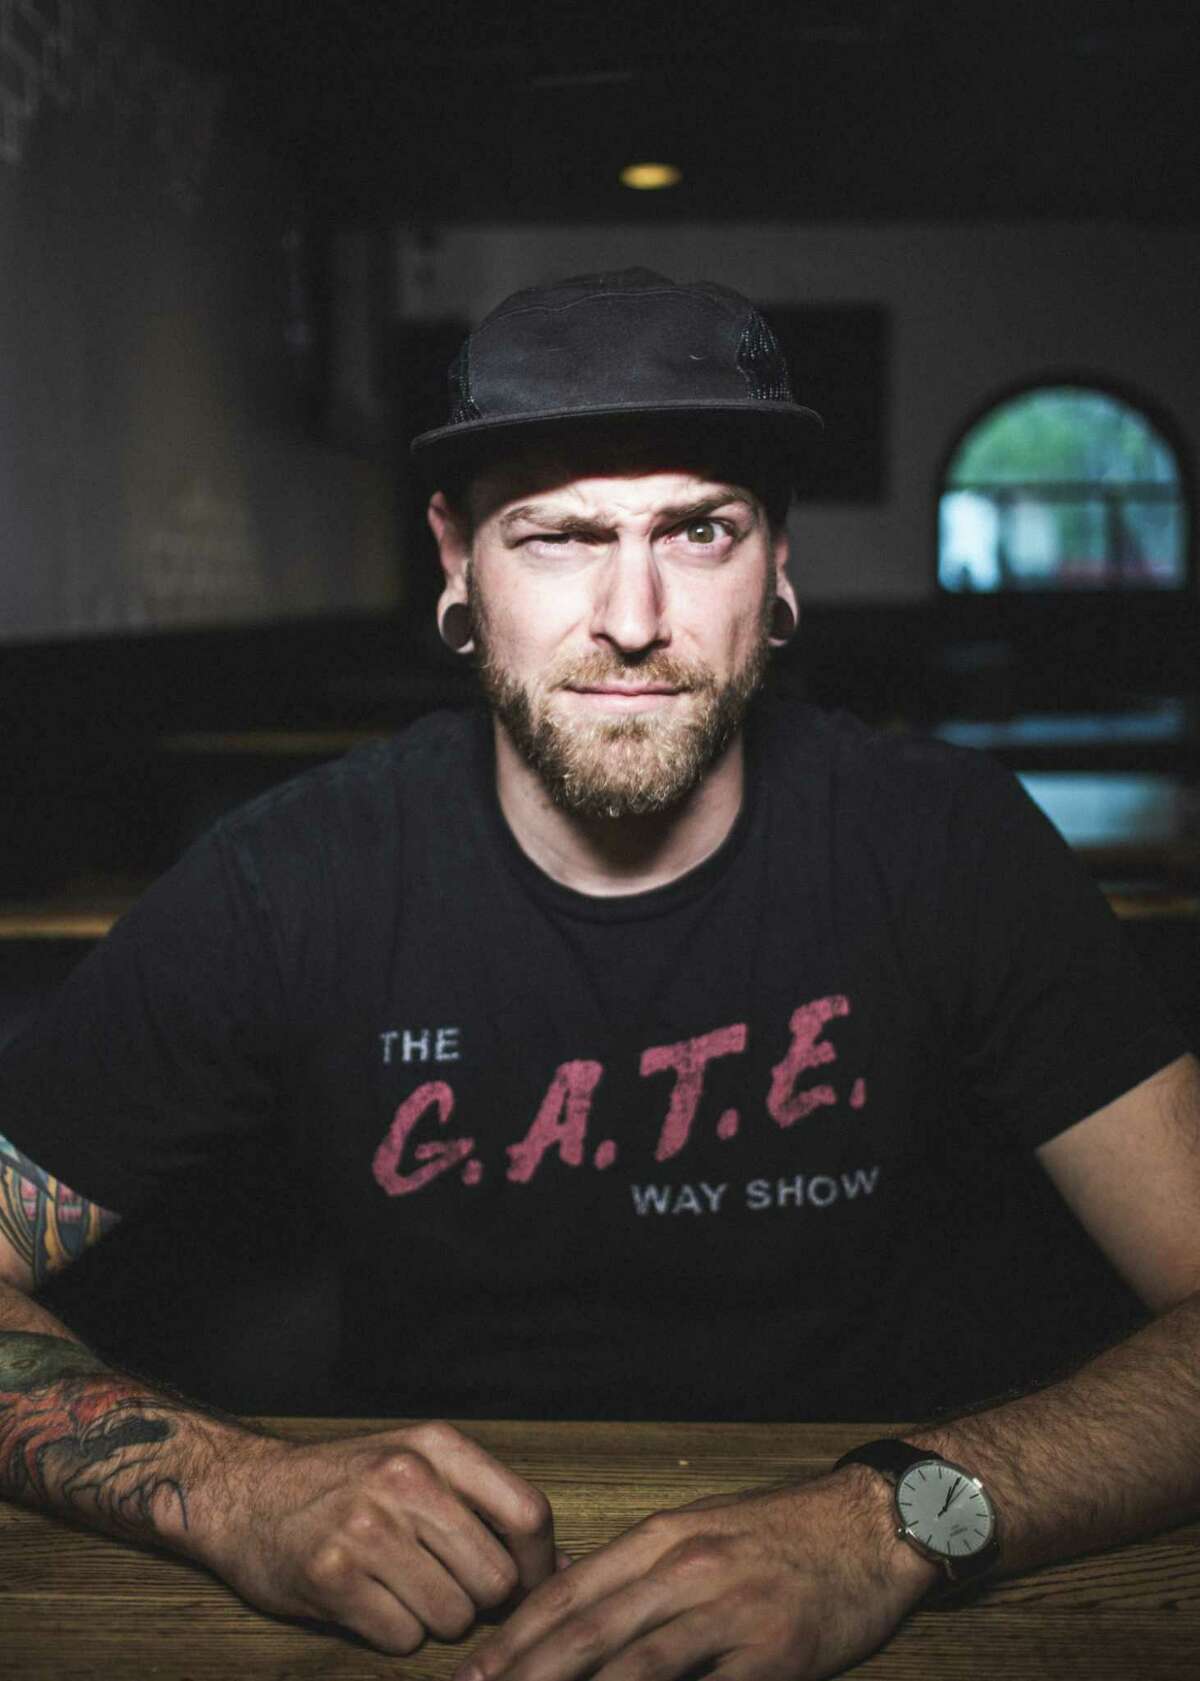 Colonie native and Los Angeles-based comedian Mike Masilotti will perform in "The Gateway Show," a comedy tour in which comedians get high on marijuana during intermission and return to the stage to try to tell jokes while "completely baked," according to promotional material. It will be performed Friday, Feb. 28, at The Fuze Box in Albany. (Photo by Andrew Max Levy.)